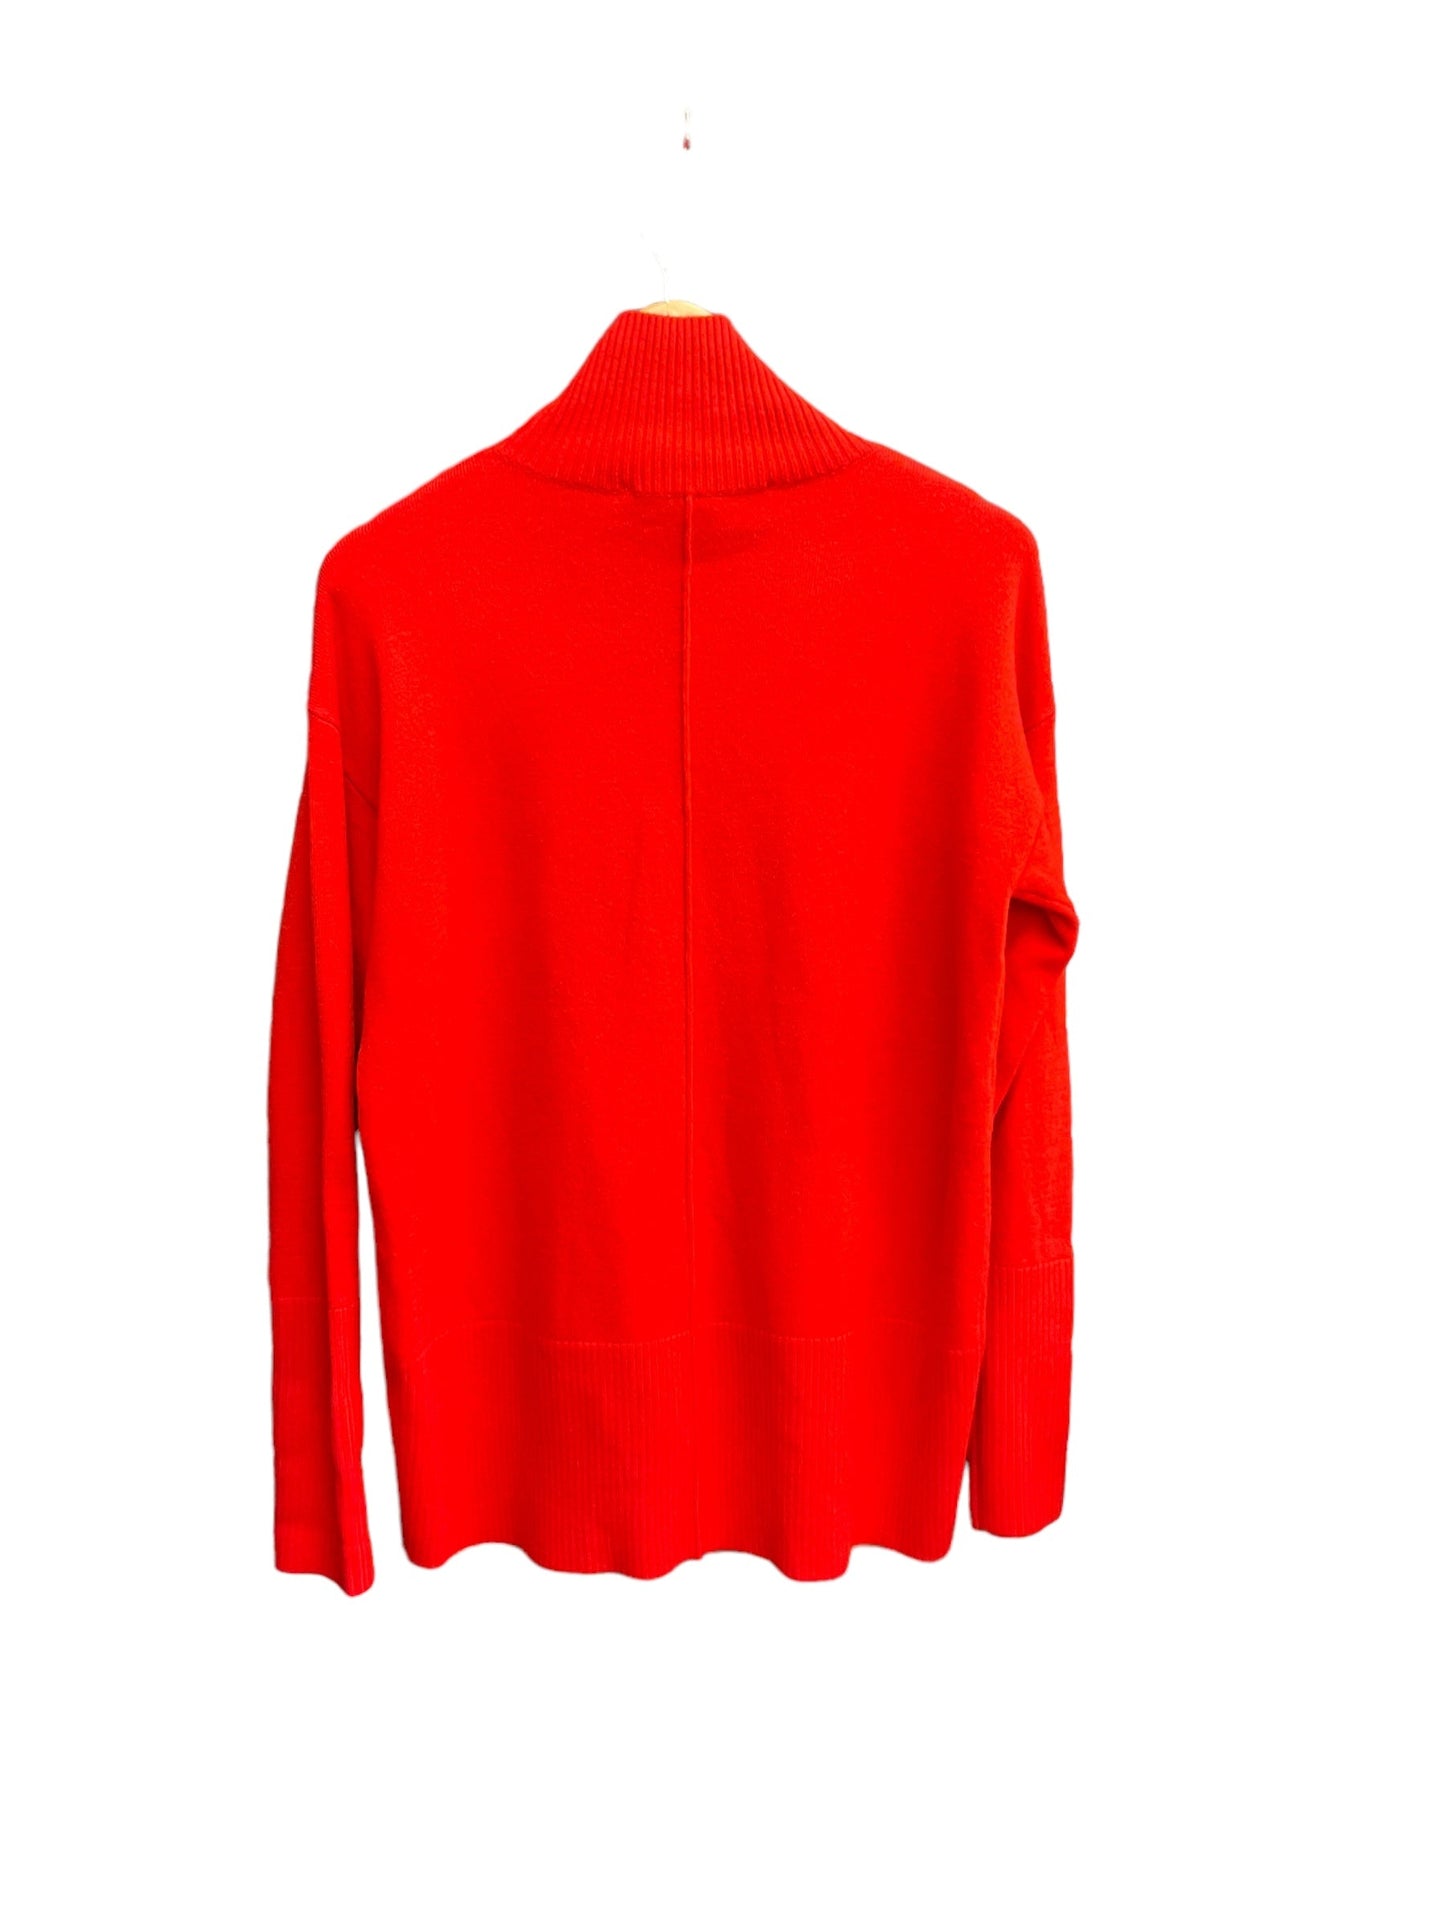 Red Top Long Sleeve French Connection, Size S